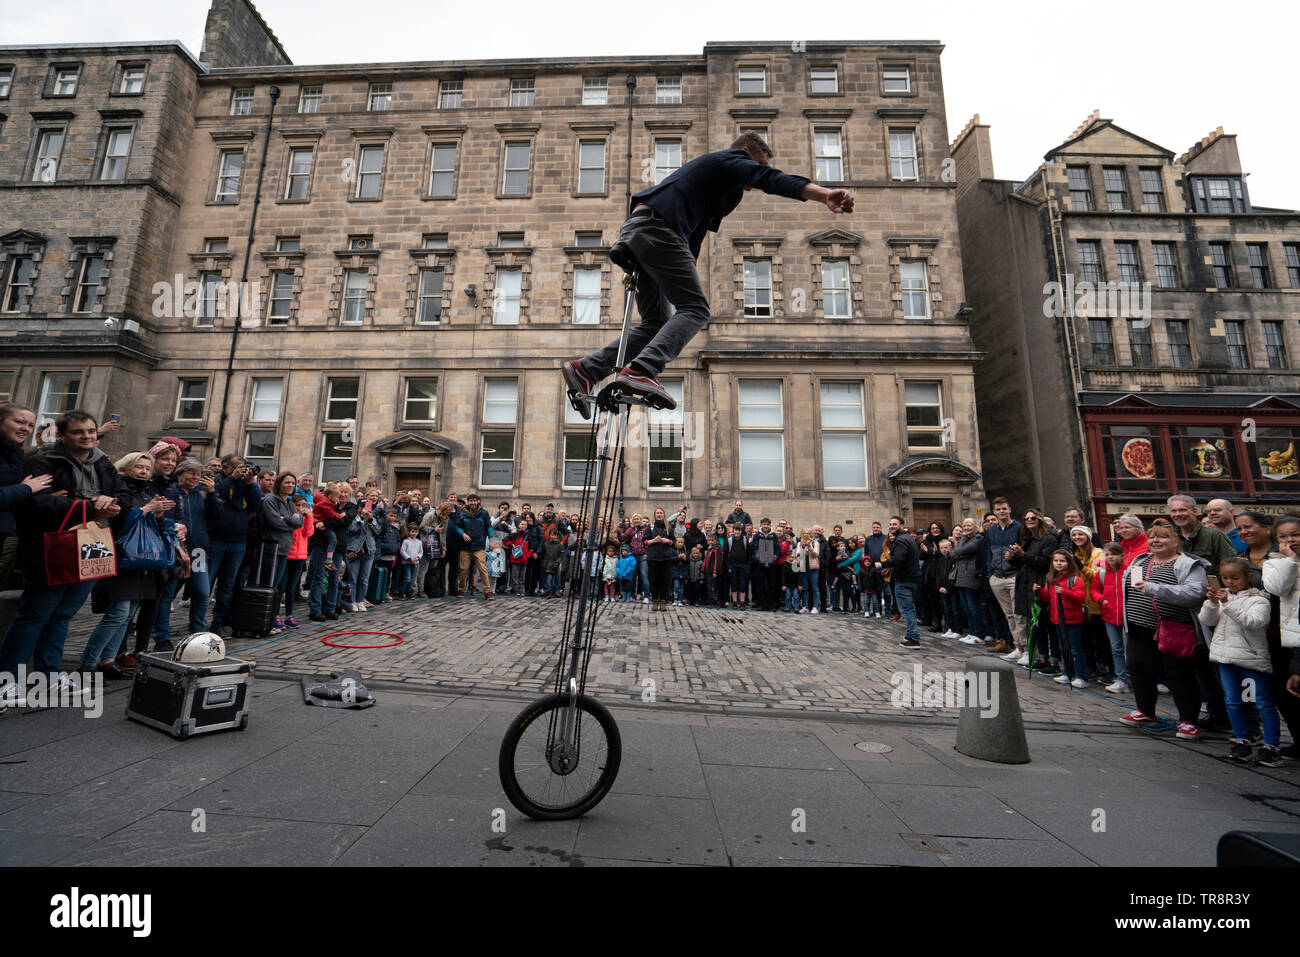 Street performer on unicycle performs to crowd on the High Street Royal Mile in Edinburgh Old Town, Scotland, UK Stock Photo